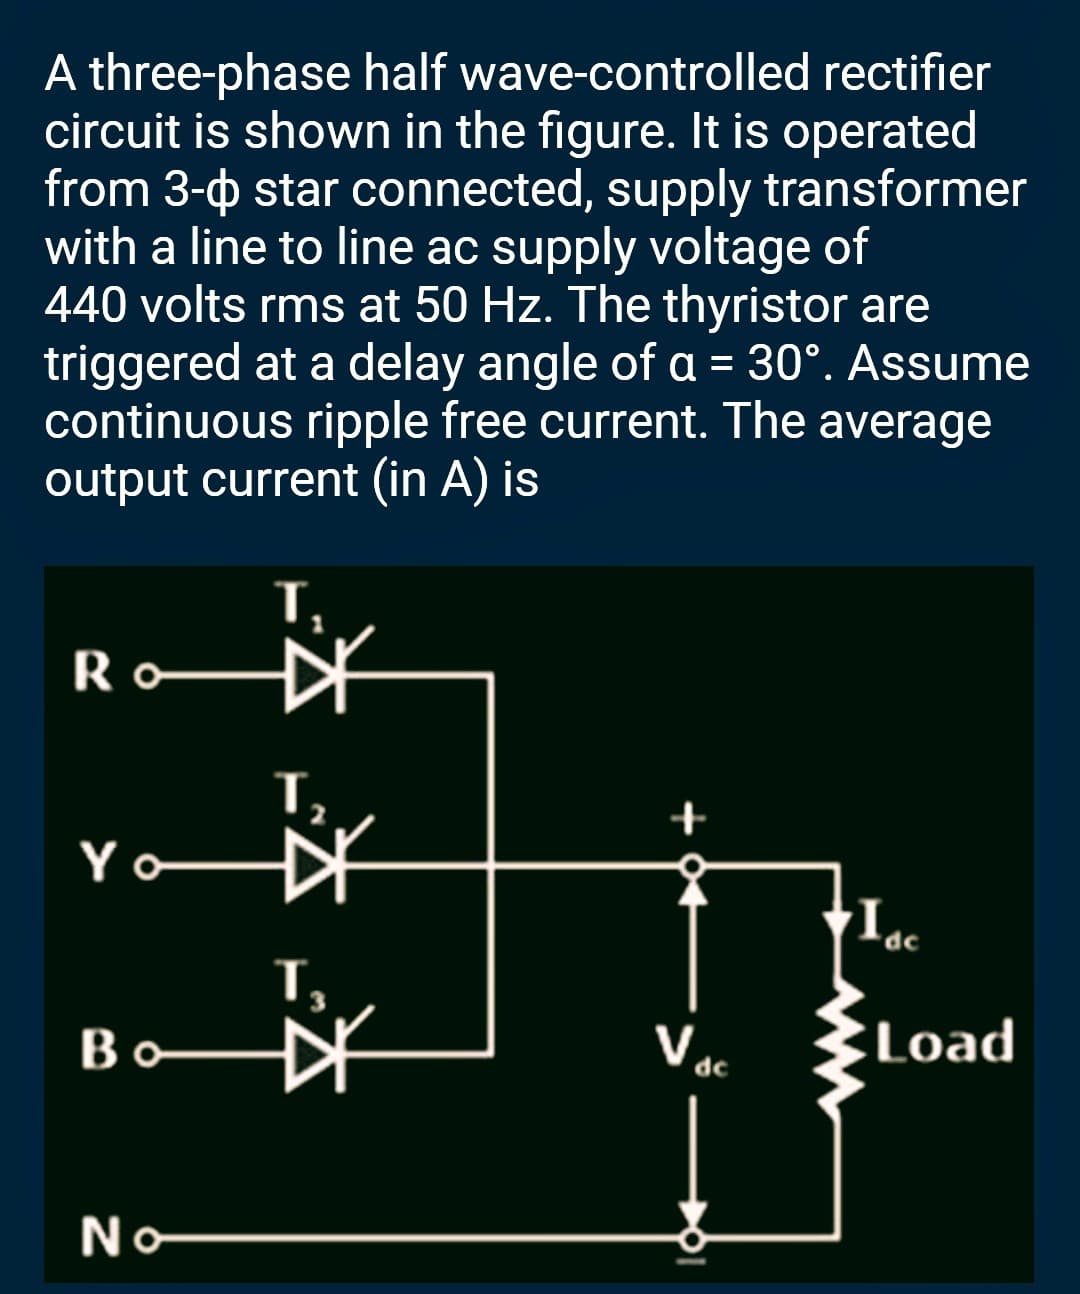 A three-phase half wave-controlled rectifier
circuit is shown in the figure. It is operated
from 3- star connected, supply transformer
with a line to line ac supply voltage of
440 volts rms at 50 Hz. The thyristor are
triggered at a delay angle of a = 30°. Assume
continuous ripple free current. The average
output current (in A) is
Ro
Yo
Во
No
T₂
+
Voc
∙Iac
Load